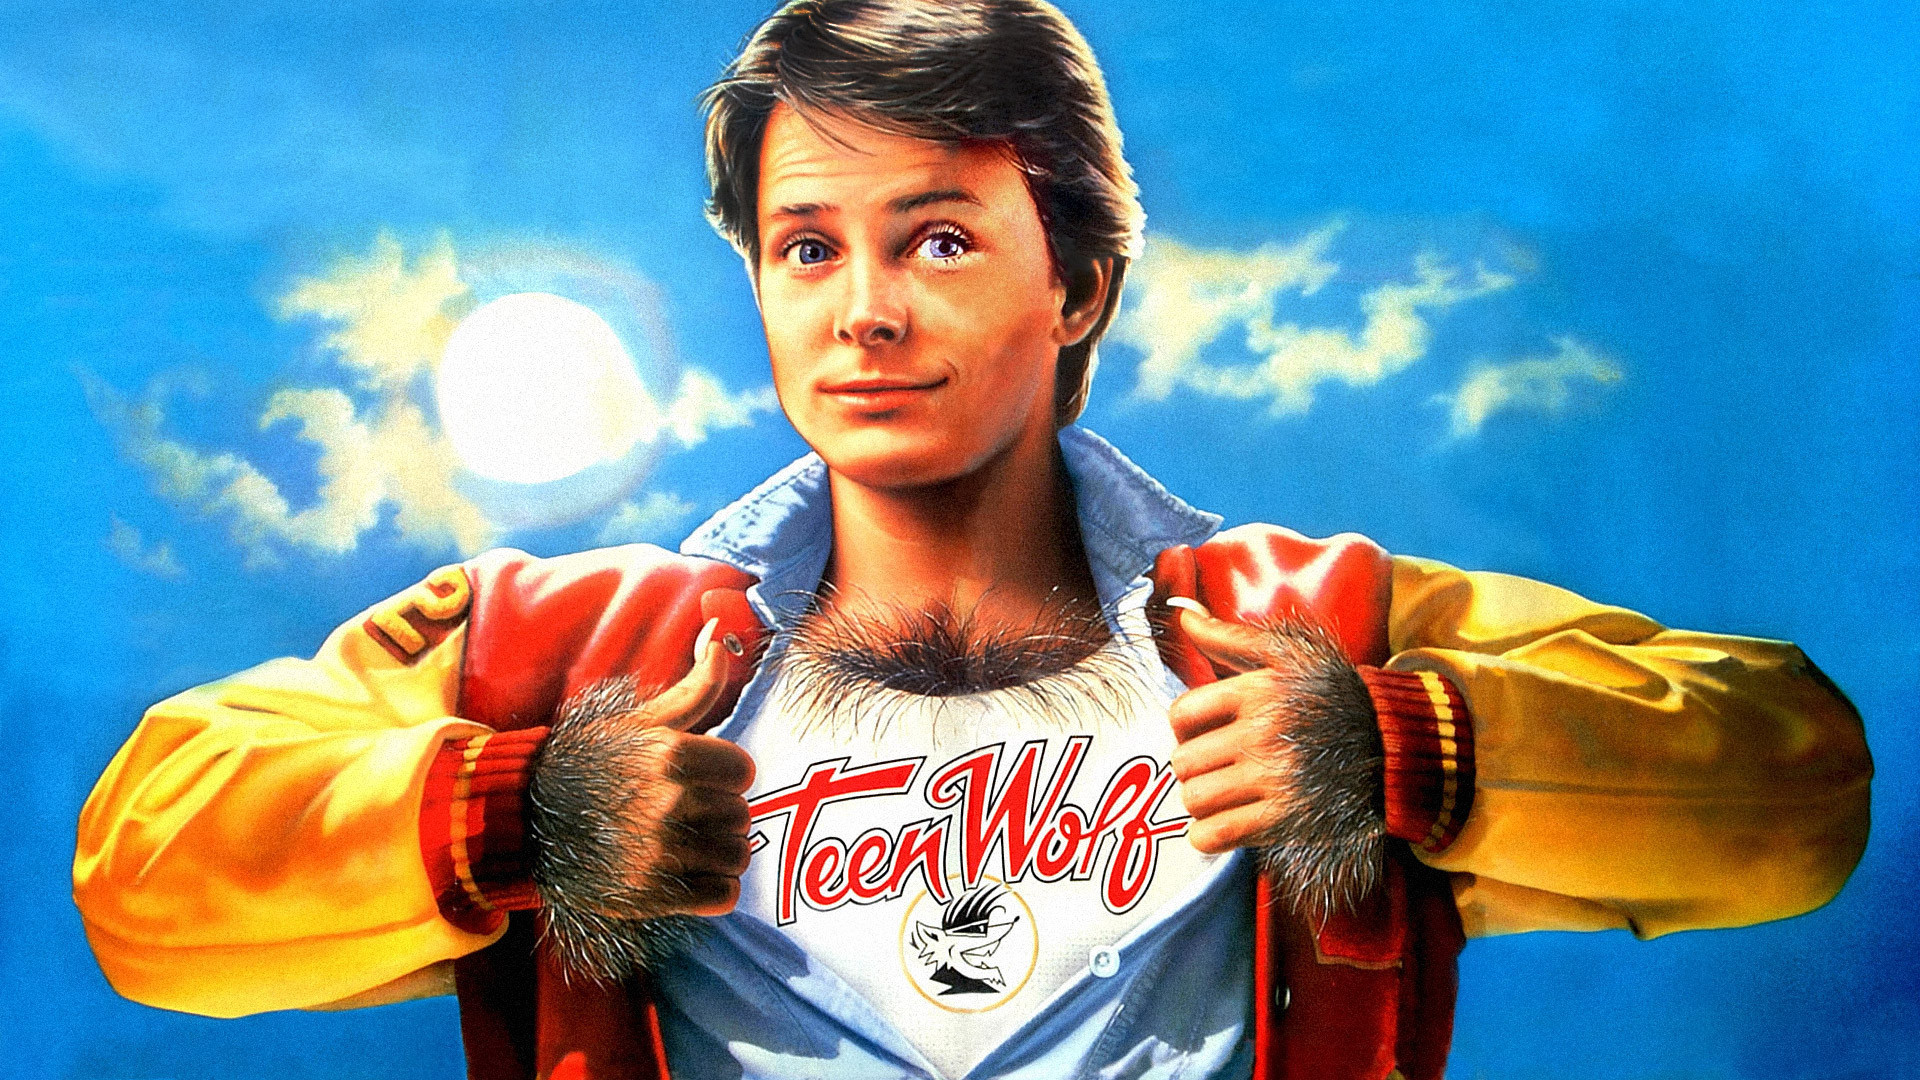 “too Terrible” Teen Wolf - Teen Wolf Movie Poster , HD Wallpaper & Backgrounds